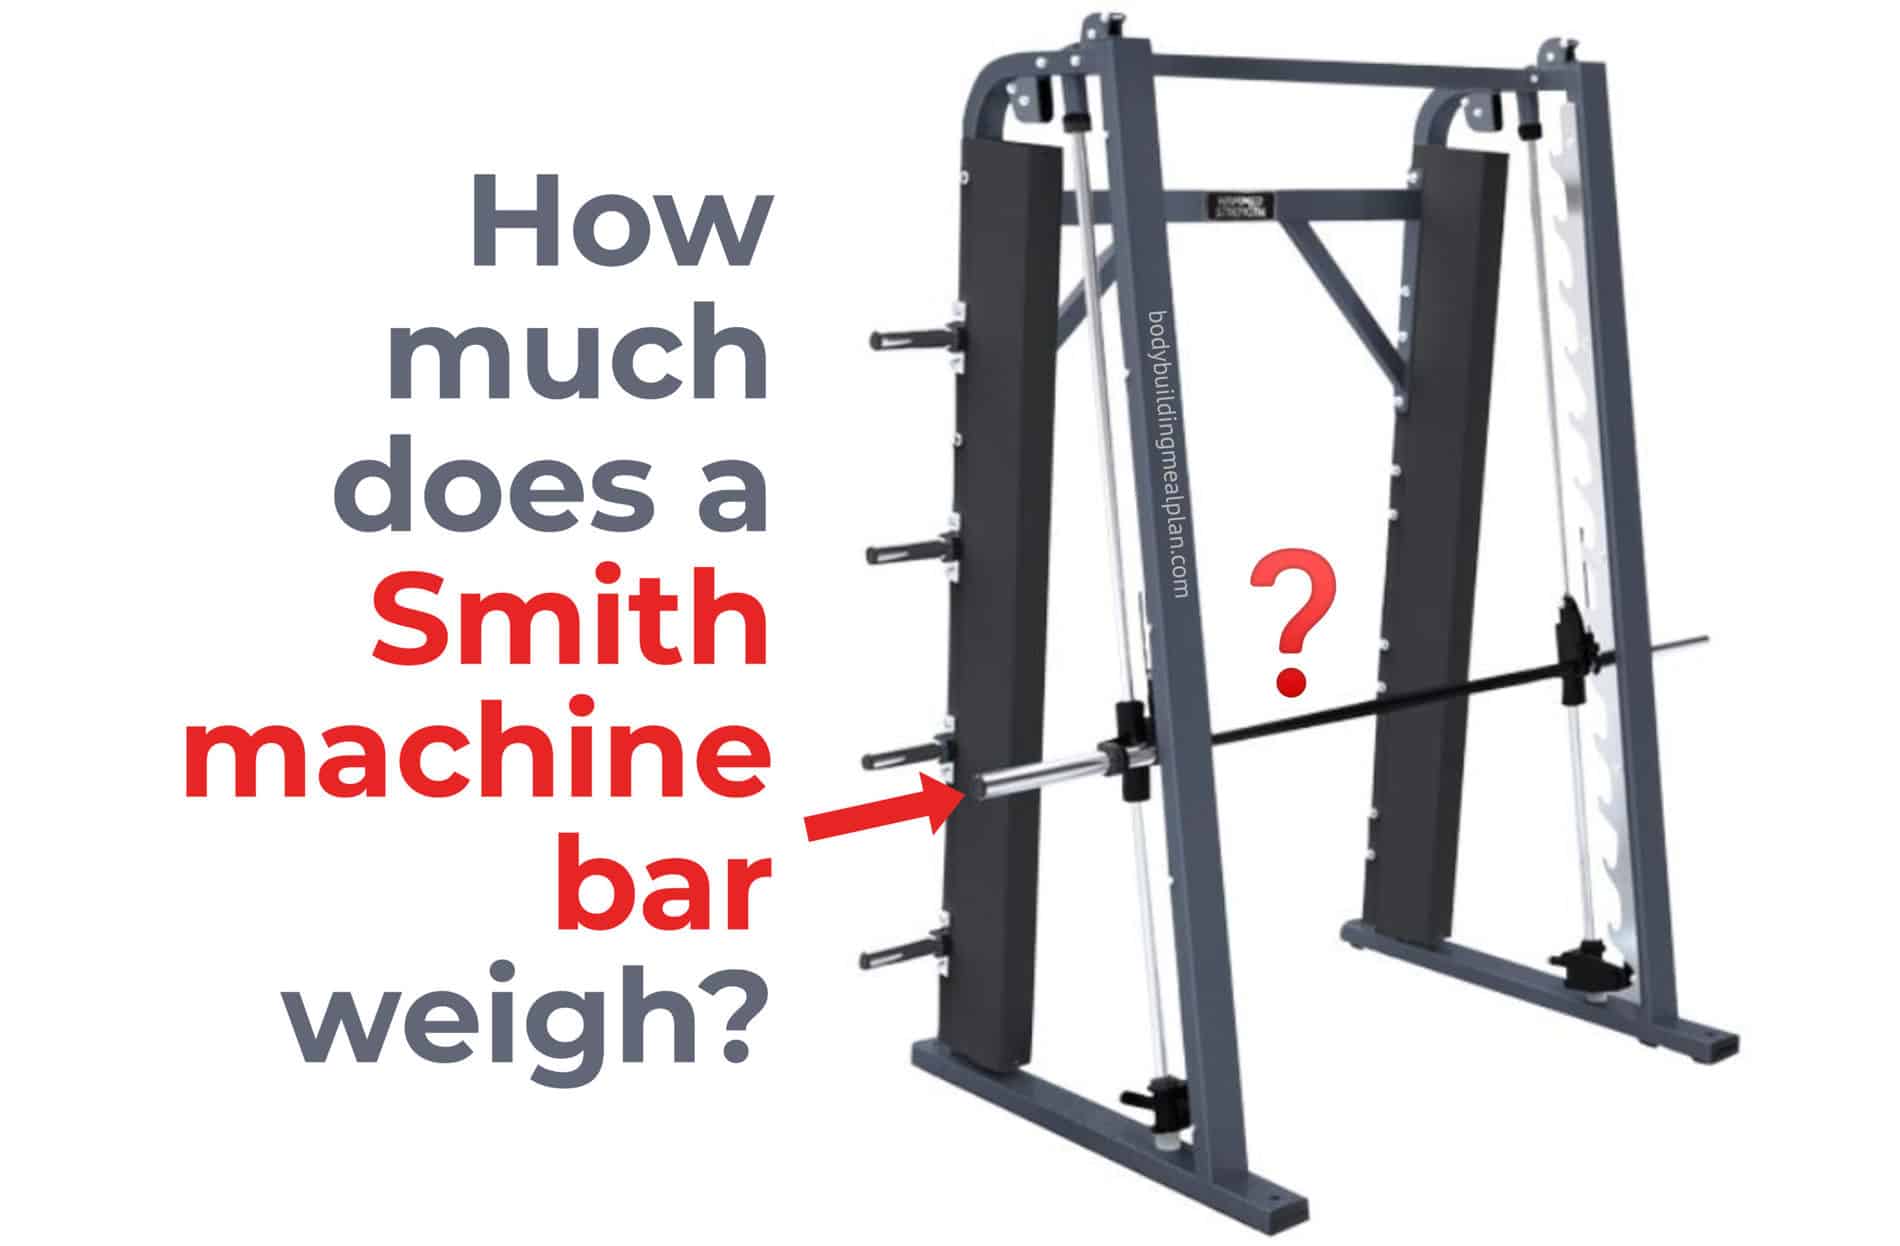 How to Count Weight on Smith Machine?